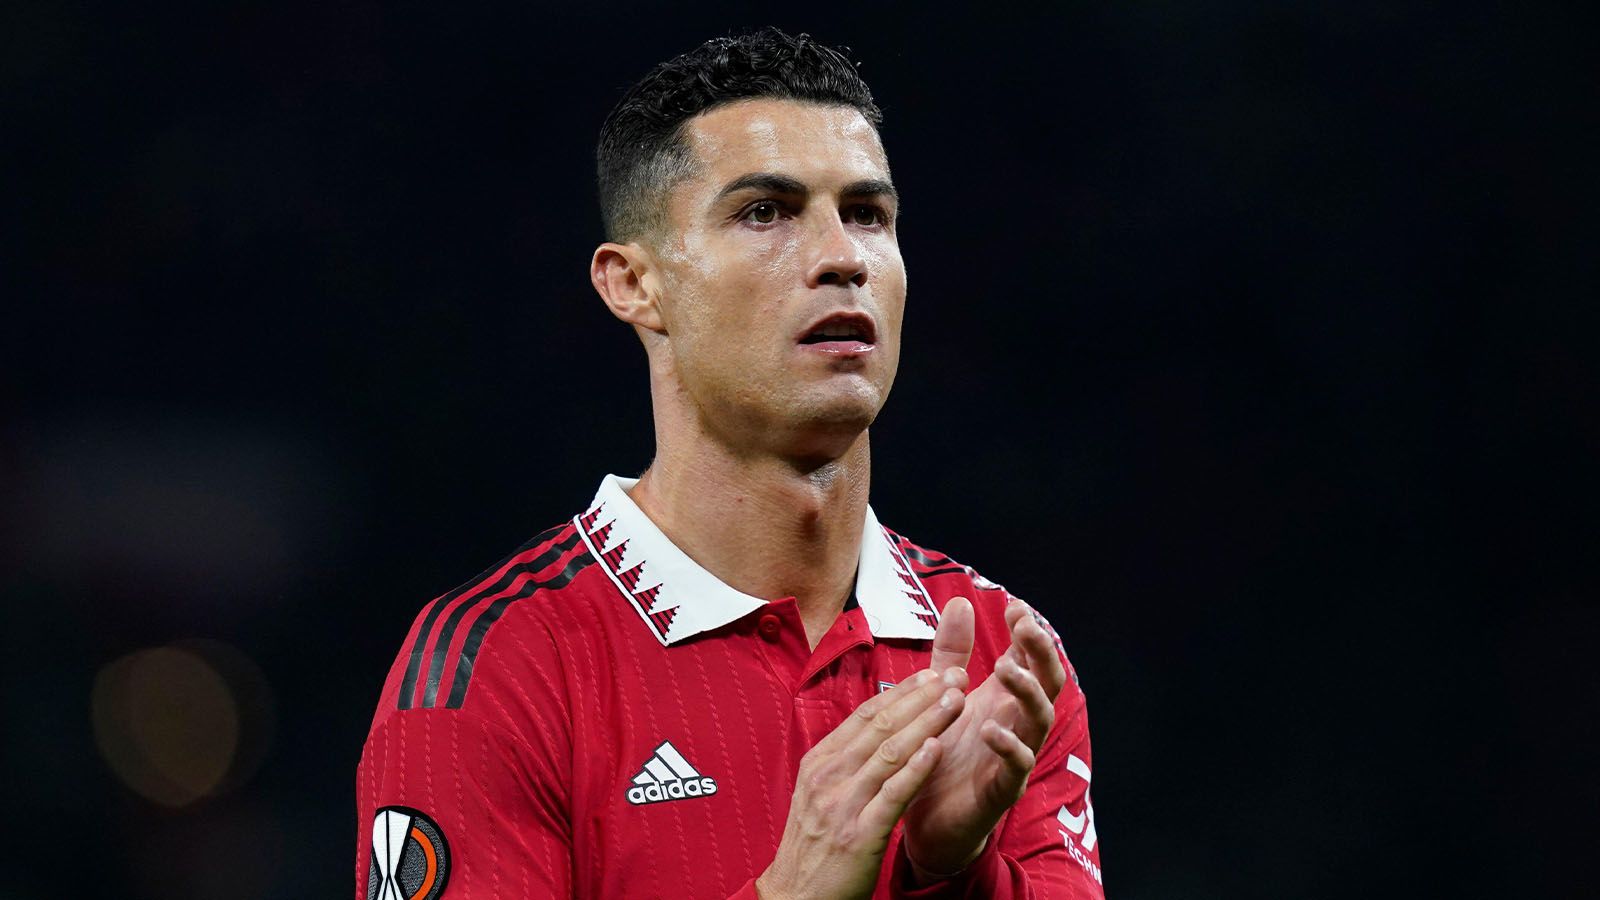 Cristiano Ronaldo is to leave Manchester United by mutual agreement, with immediate effect.